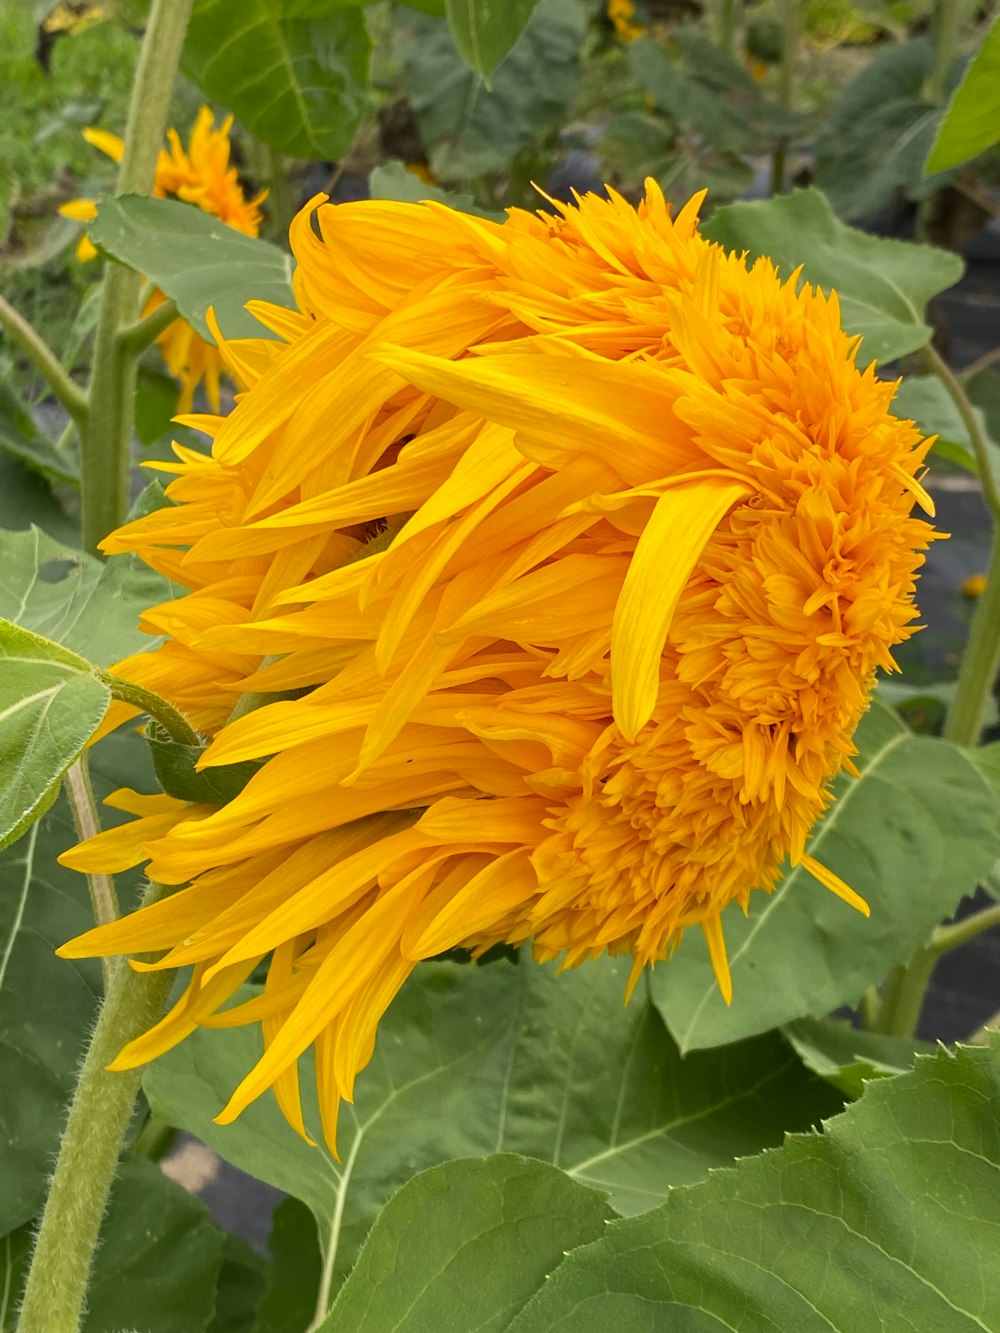 a large sunflower in a field of green leaves